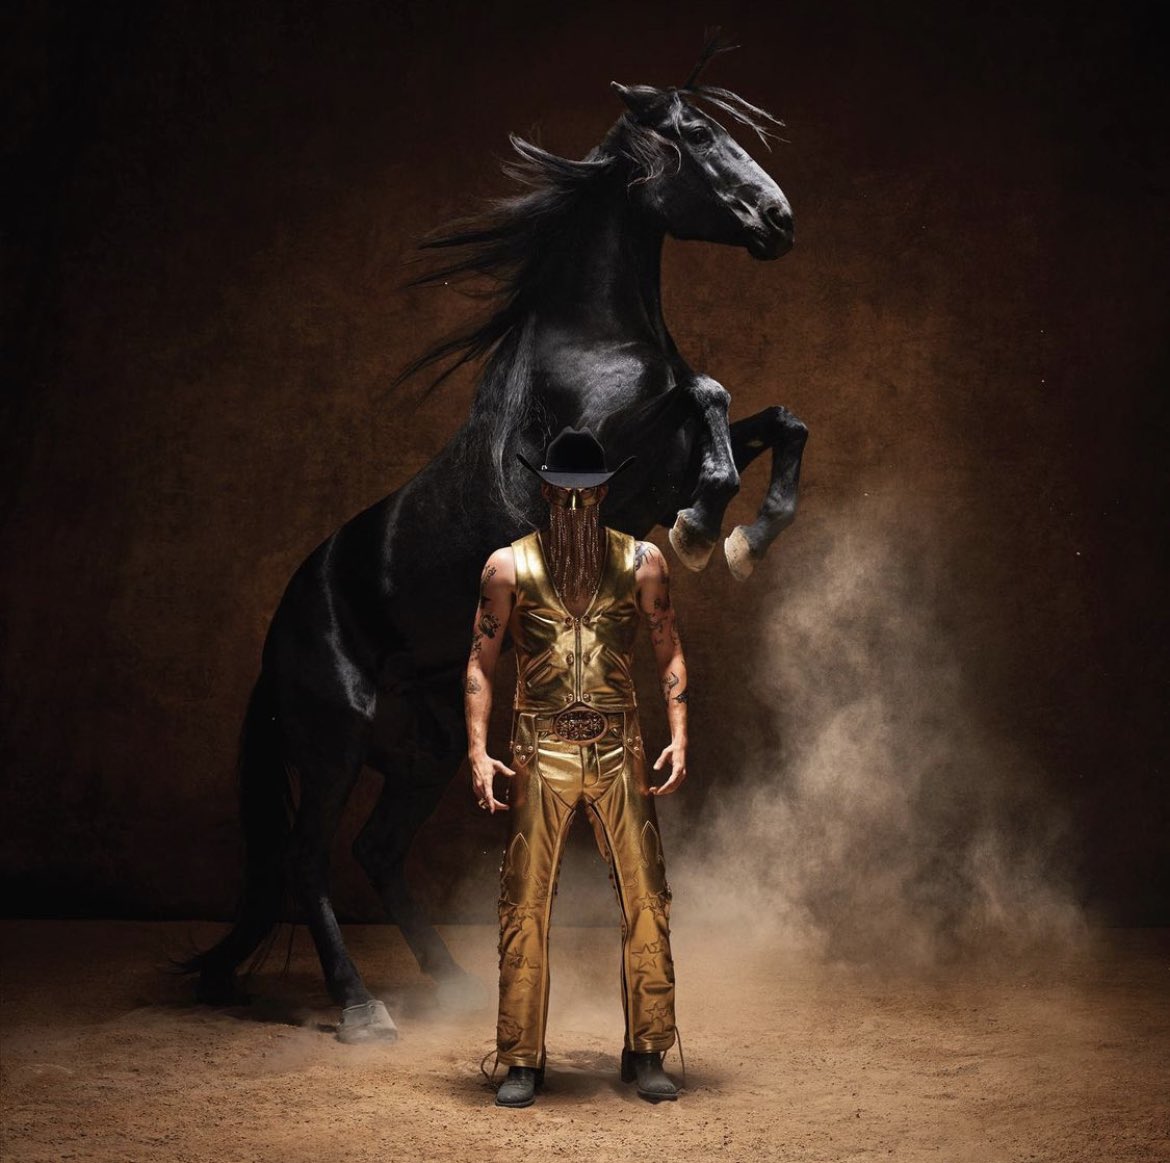 Orville Peck — Outta Time cover artwork